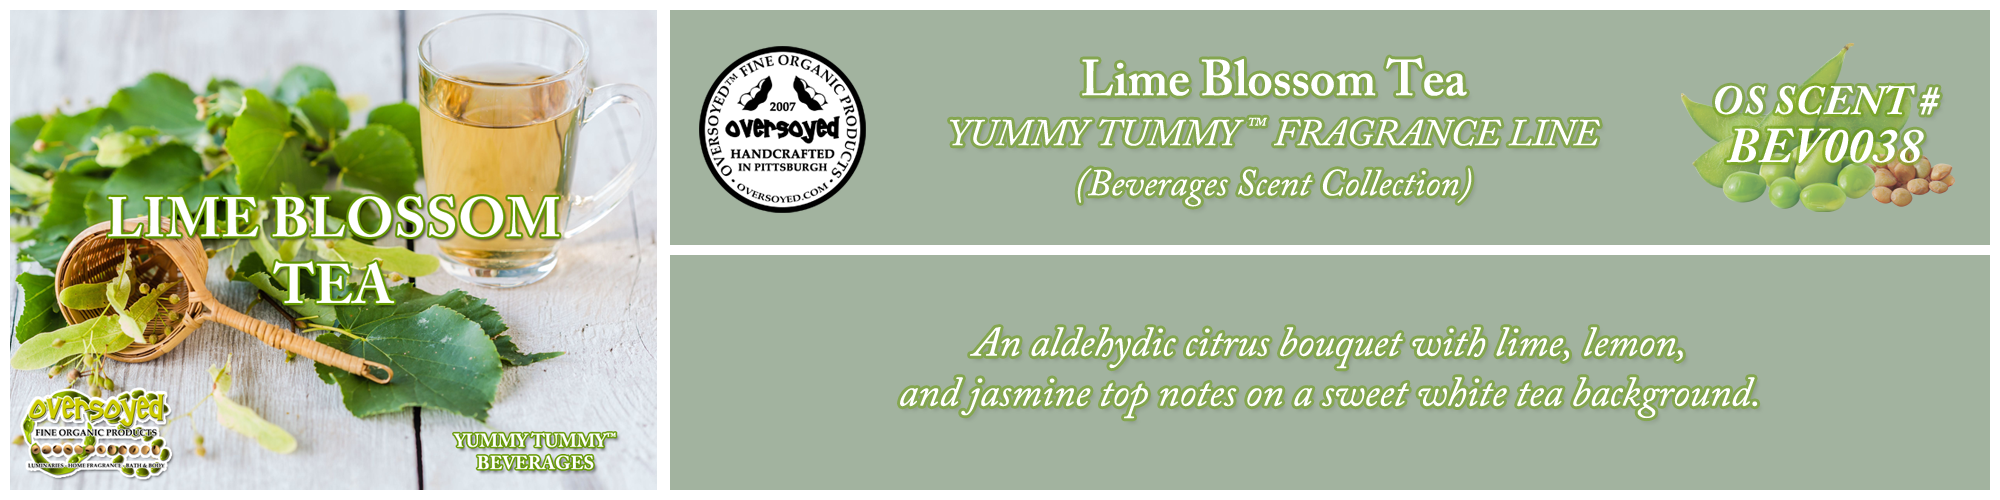 Lime Blossom Tea Handcrafted Products Collection